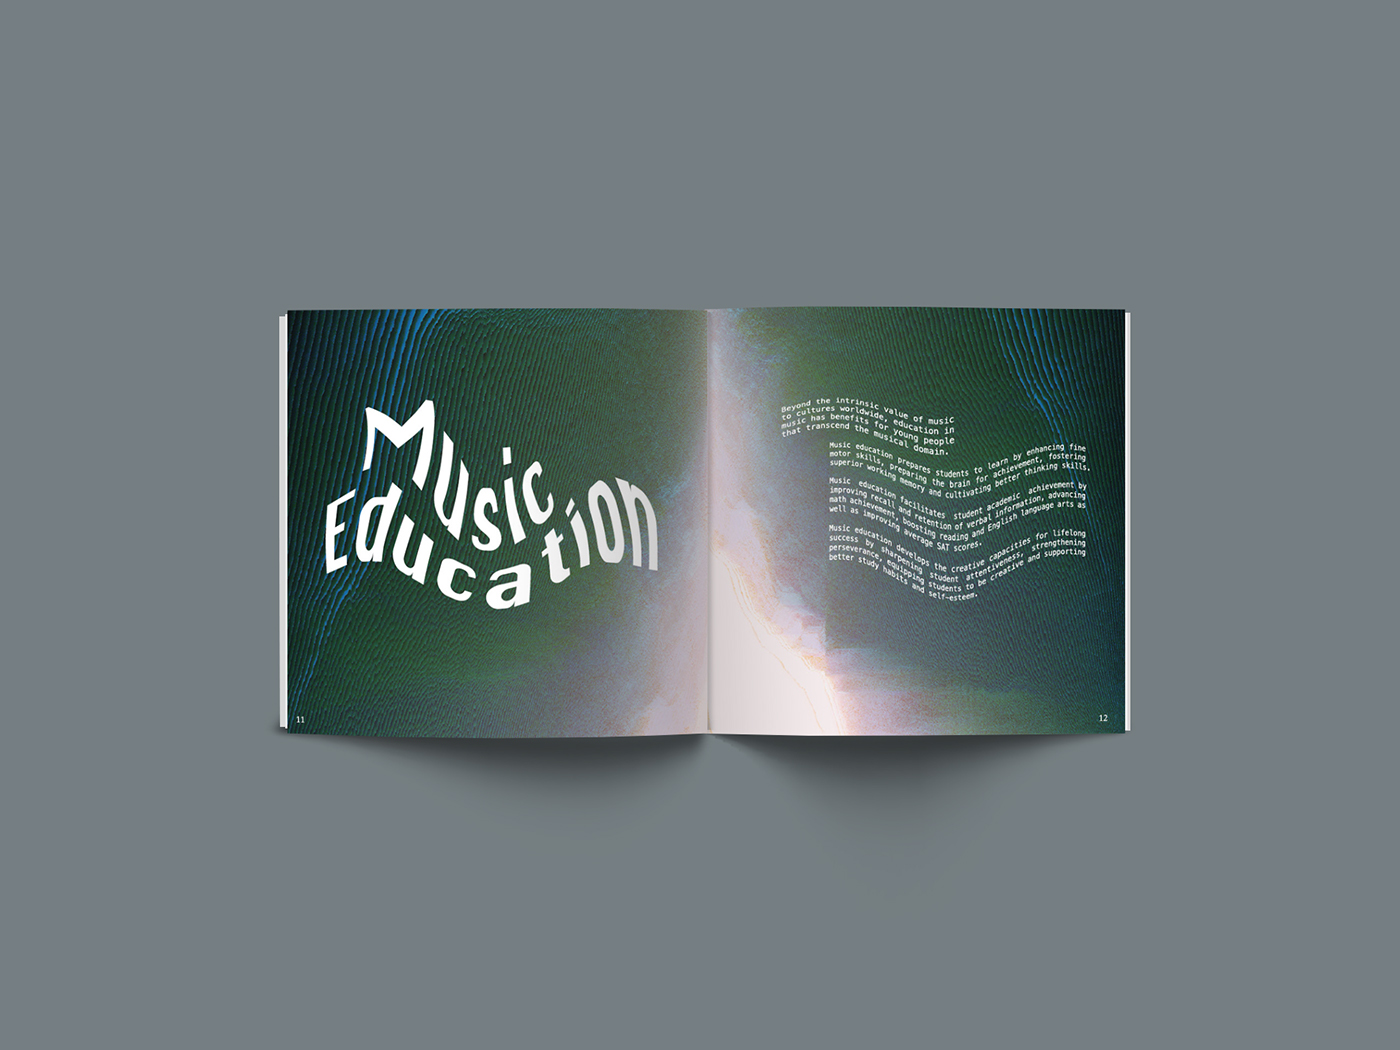 type Musicology pixel sorting book design psychology psychology of music book glitch art Glitch editorial publication